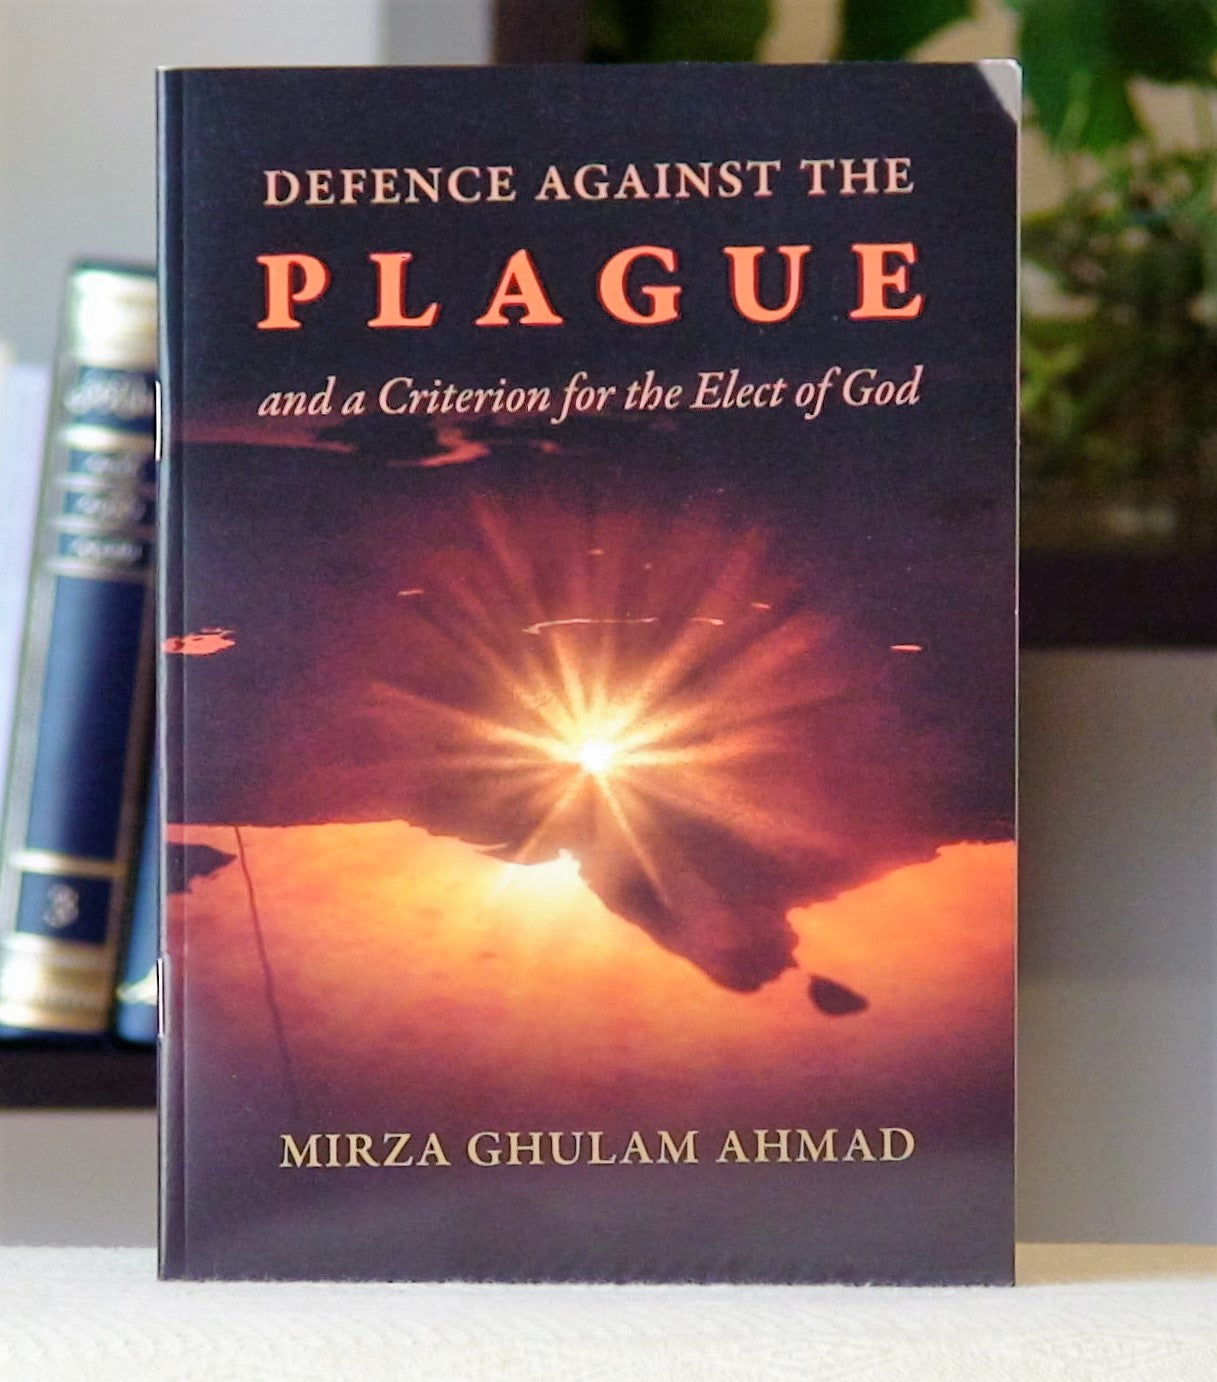 Defense against the plague and a Criterion for the Elect of God